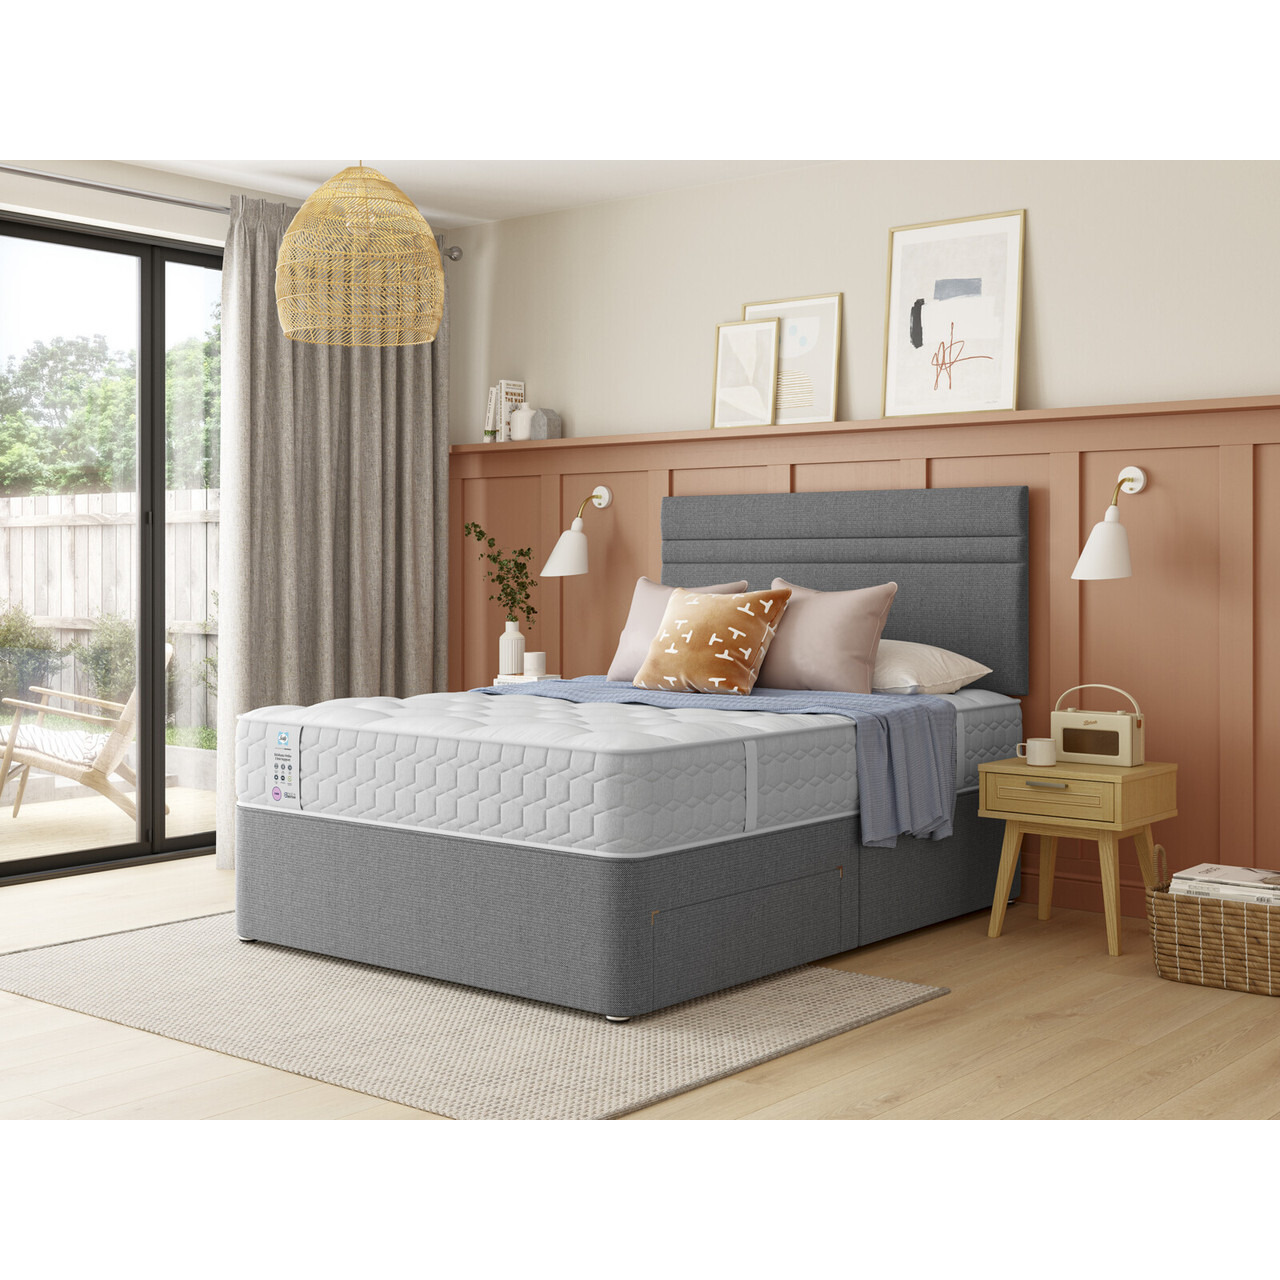 Sealy Brisbane Ortho Extra Firm Divan Bed Set - image 1